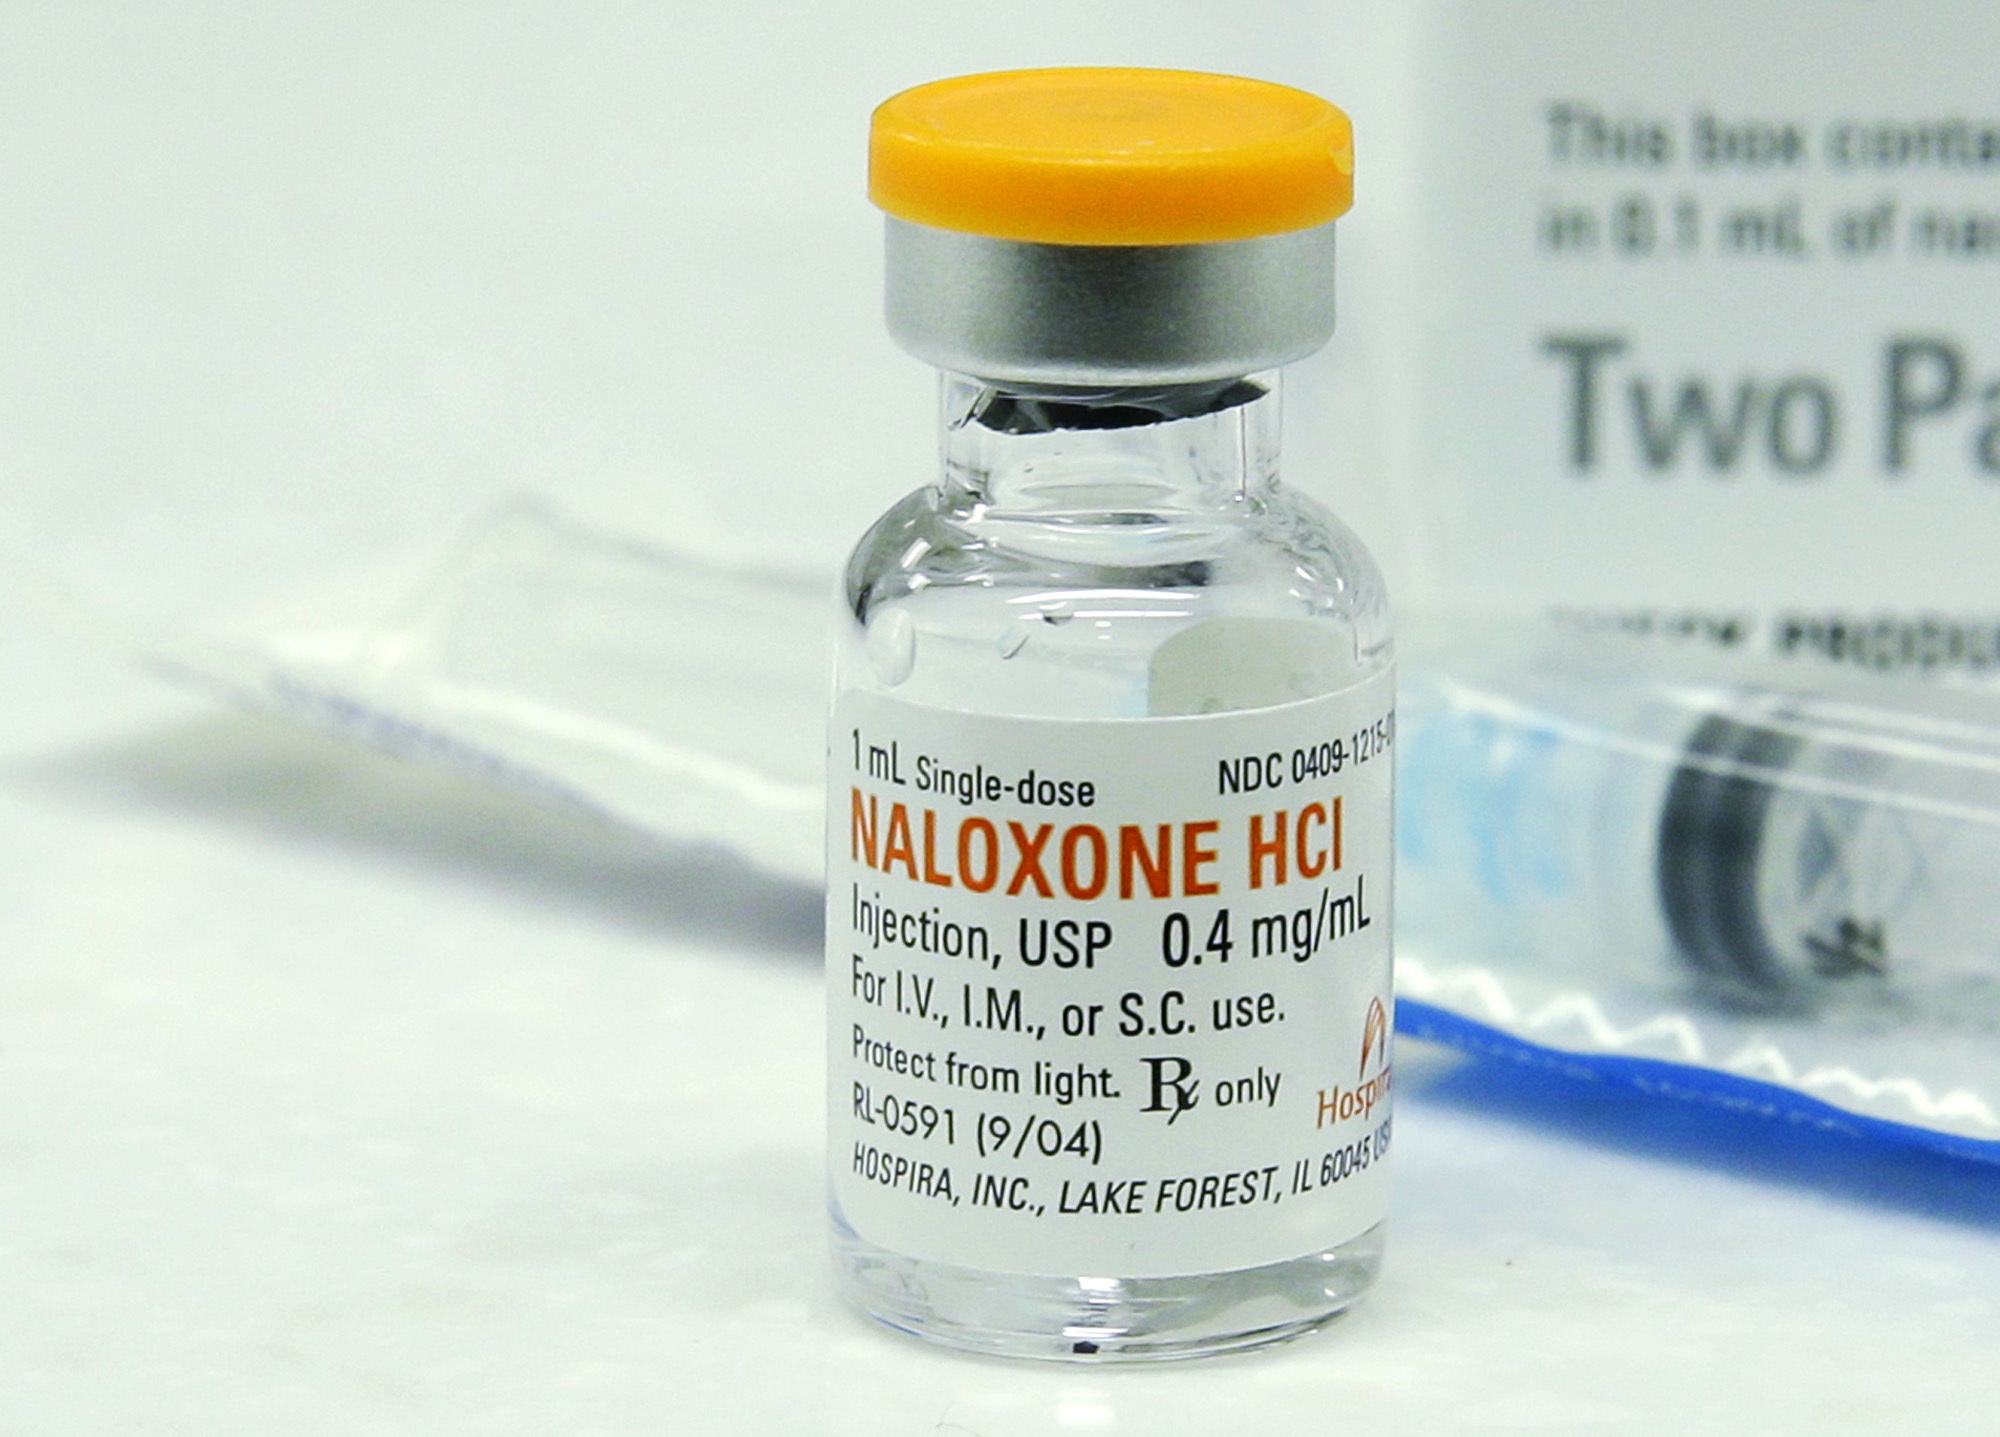 A vial of Naloxone, which can be used to block the potentially fatal effects of an opioid overdose, is seen at an outpatient pharmacy, October 2016. (AP/Ted S. Warren)